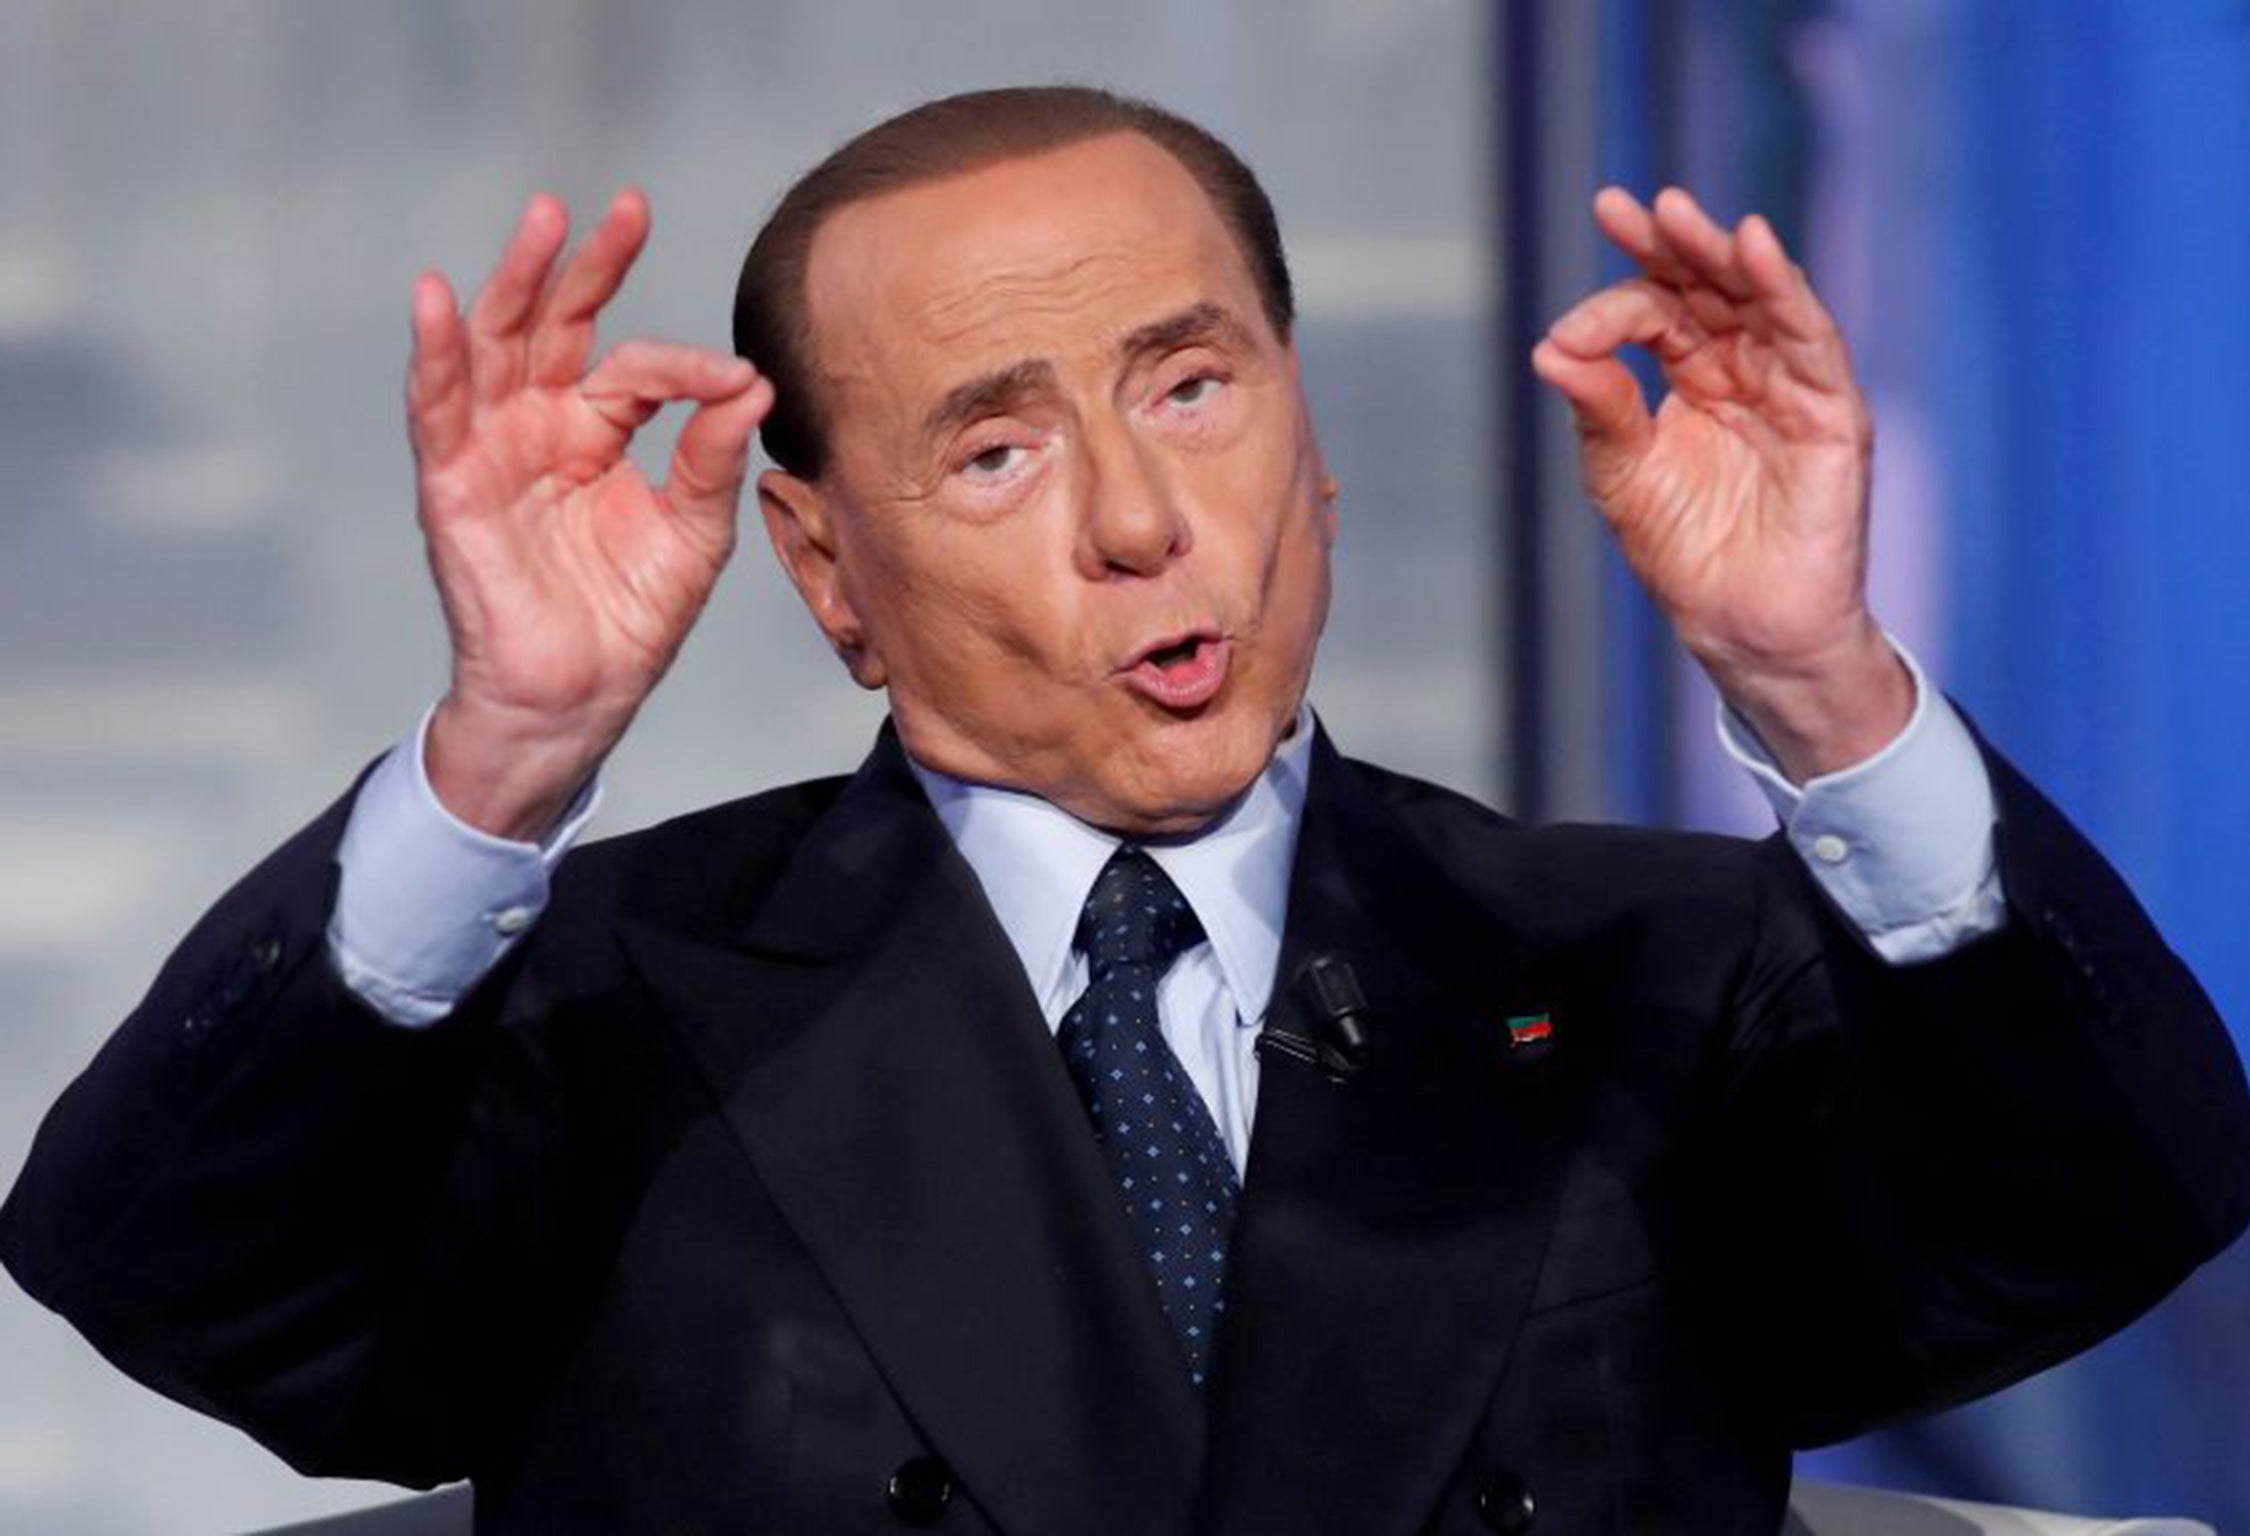 Silvio Berlusconi was the first to reap the true financial rewards from football